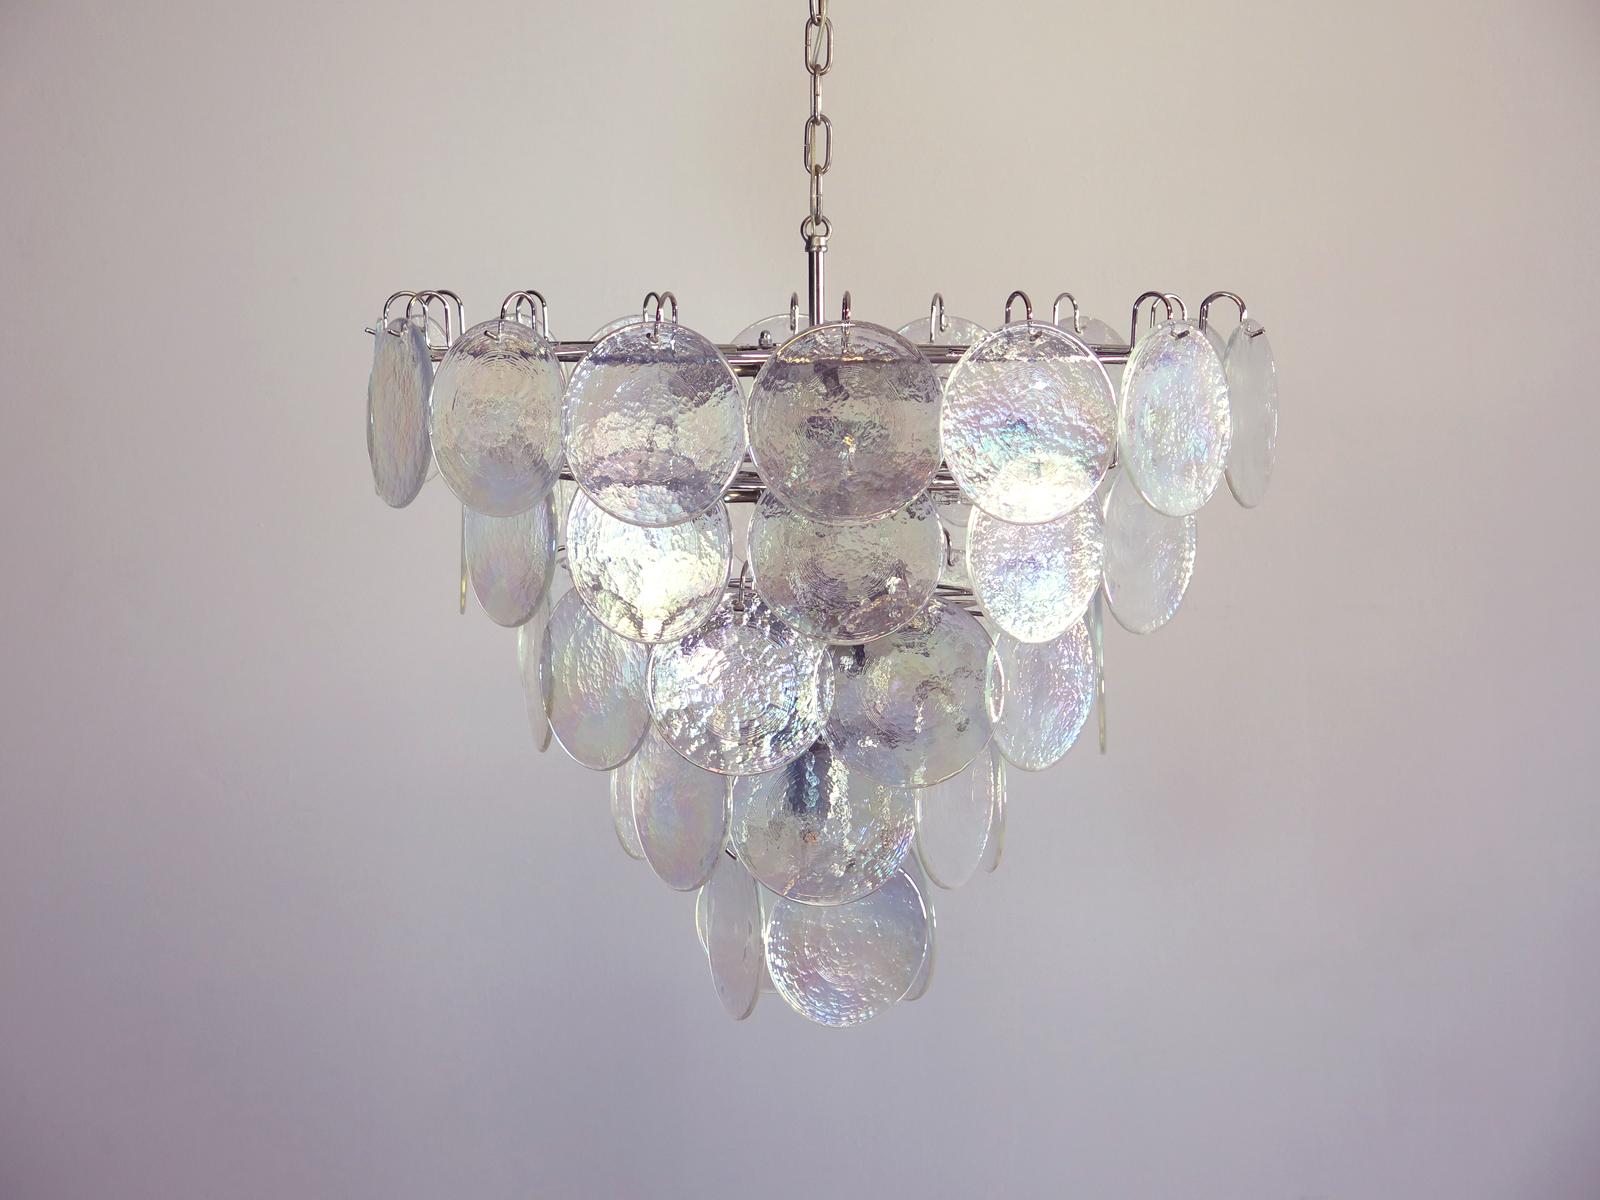 Italian Murano chandelier. The chandelier has 50 Murano iridescent glass disks. The glasses are now 
unavailable, they have the particularity of reflecting a multiplicity of colors, which makes the chandelier a 
true work of art. Nickel metal